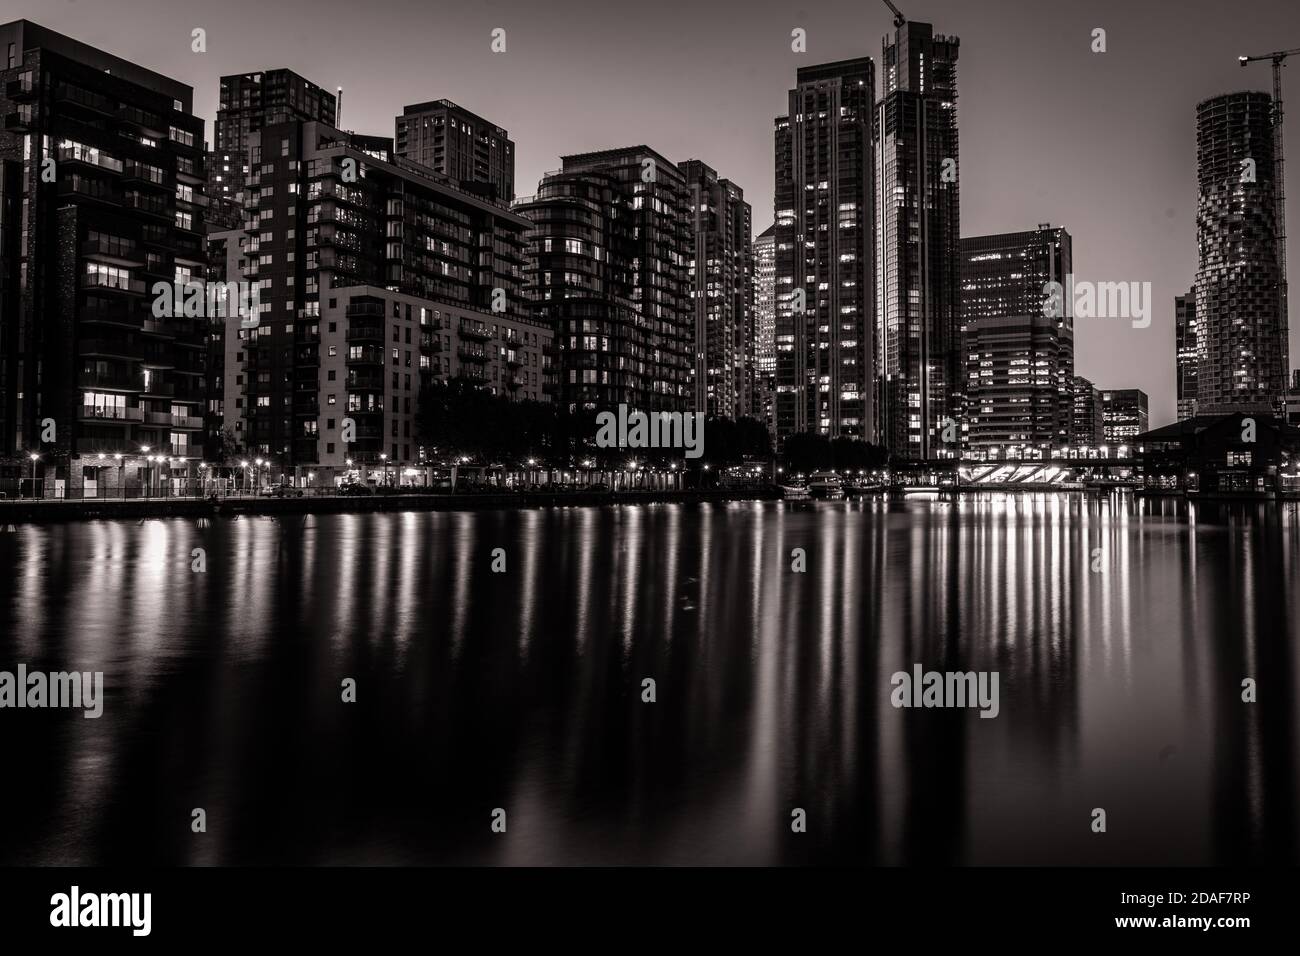 Tall buildings at night time with lights reflexions on the water Stock Photo